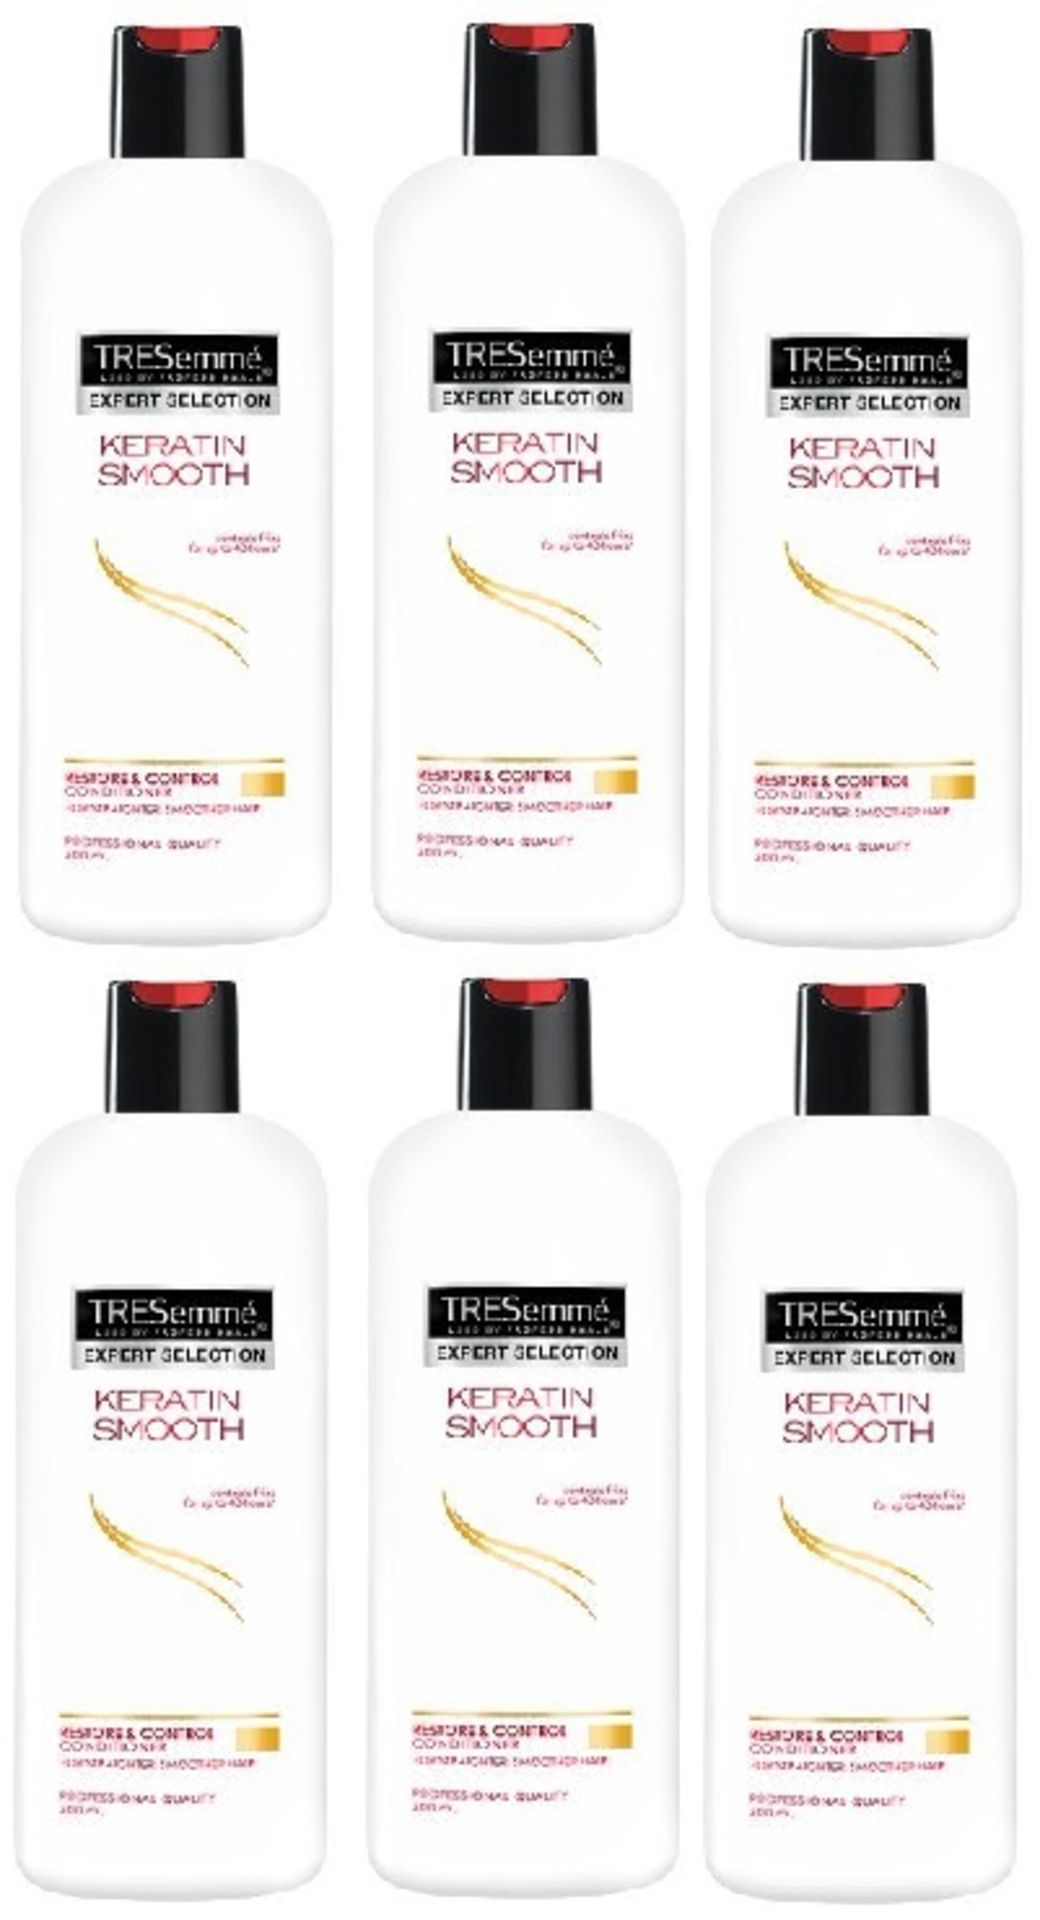 V *TRADE QTY* Brand New Lot Of 6 TRESemme Professional Keratin Smooth Restoring Conditioner 500ml